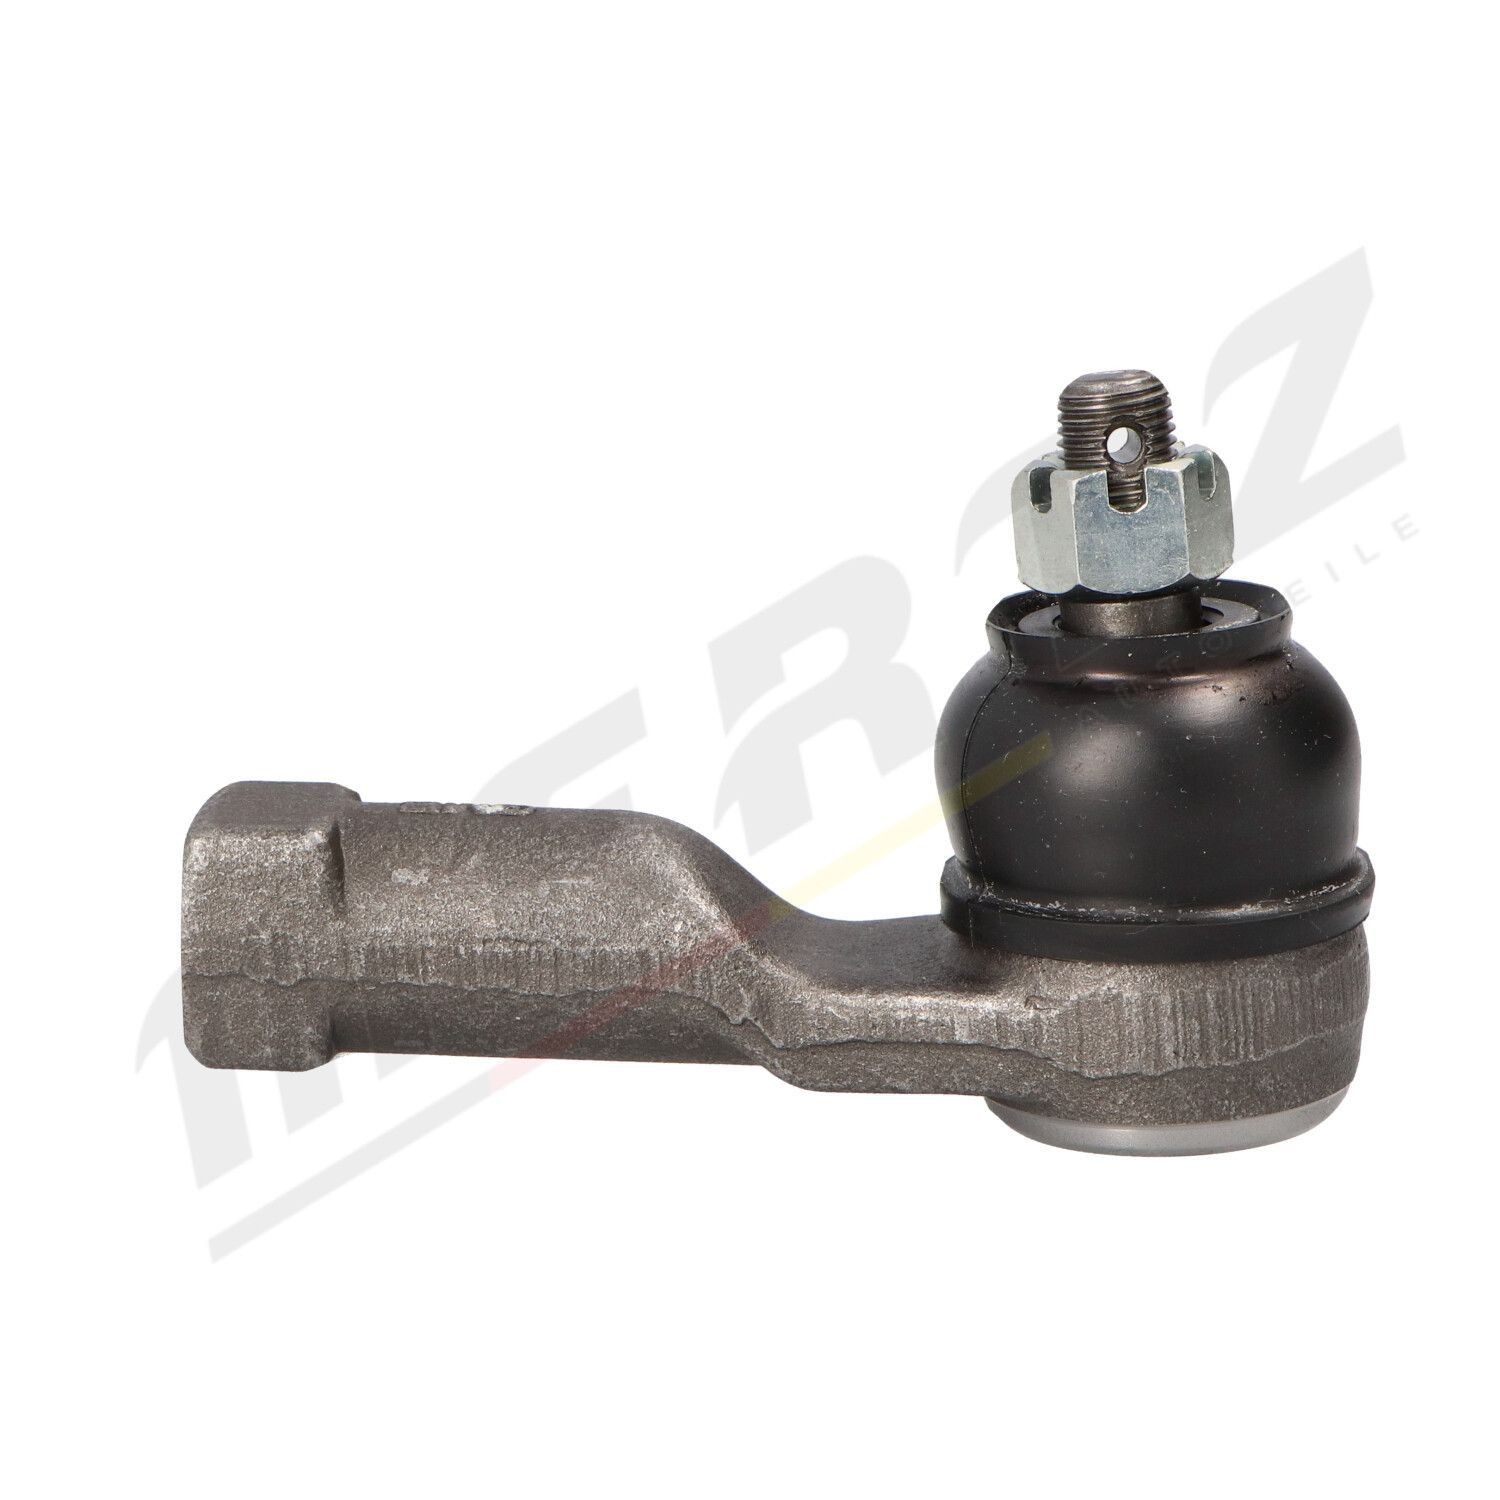 MERTZ M-S1566 Track rod end M12X1,25 mm, Front Axle Left, Front Axle Right, with crown nut